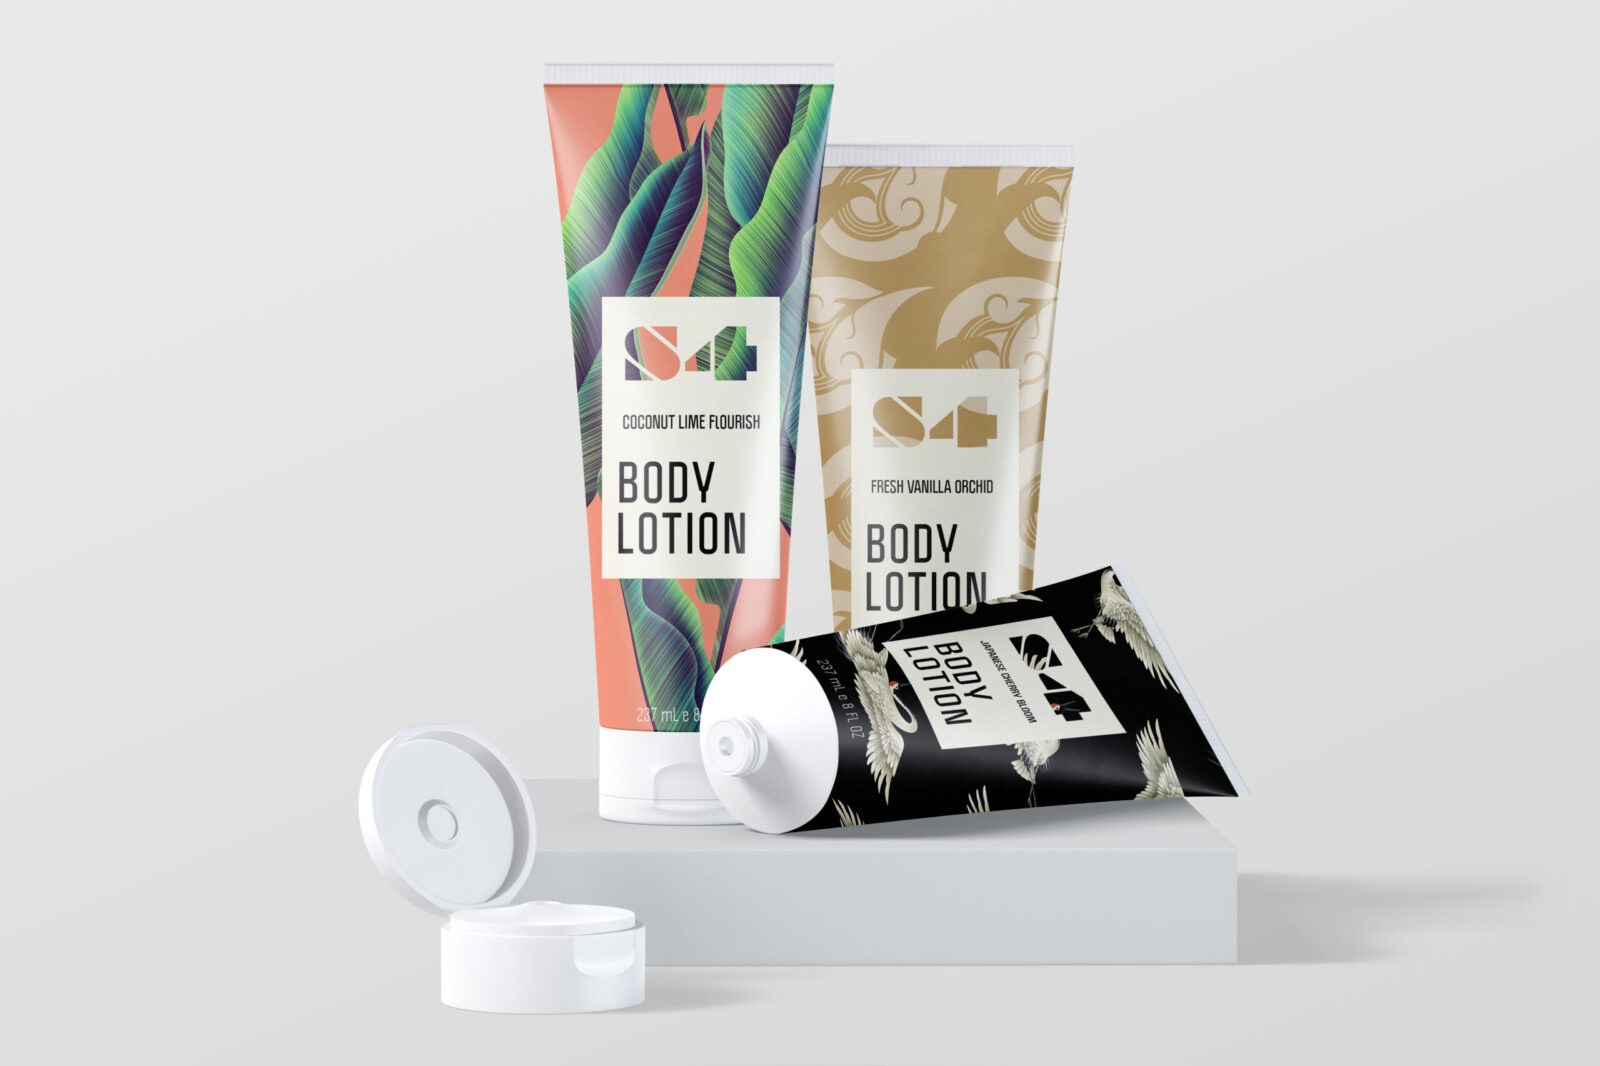 Kmart cosmetic packaging by Amber Witzke